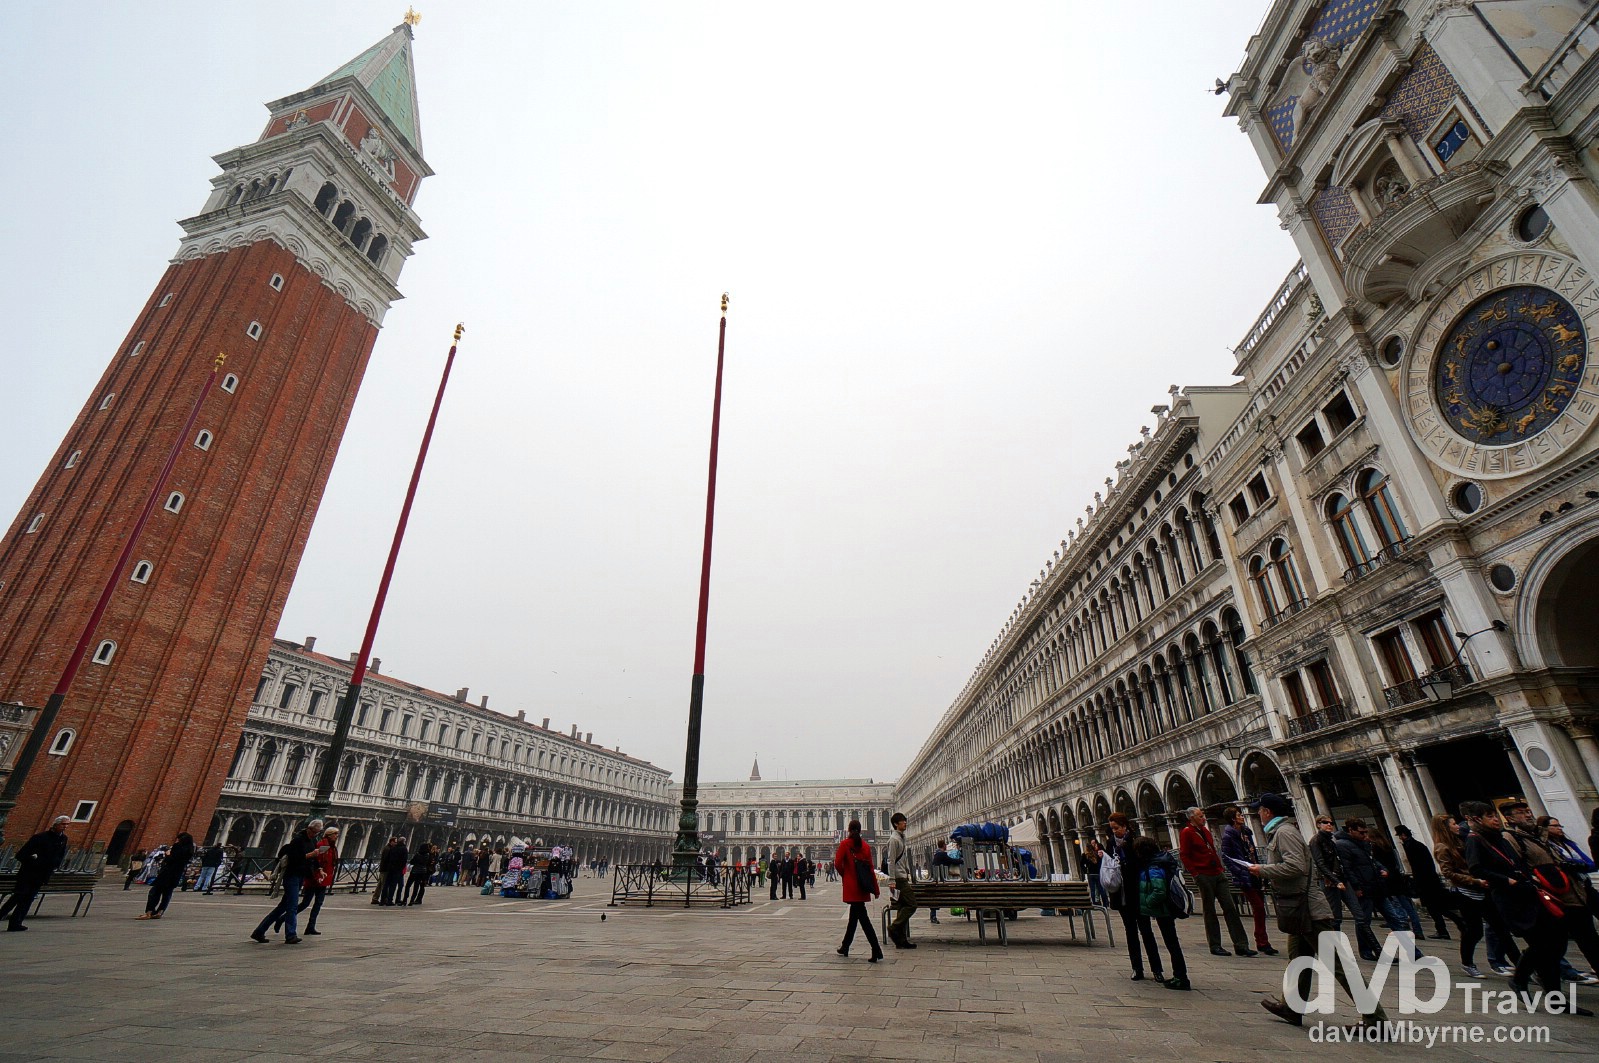 Piazza San Marco, Venice, Italy. March 19th, 2014.